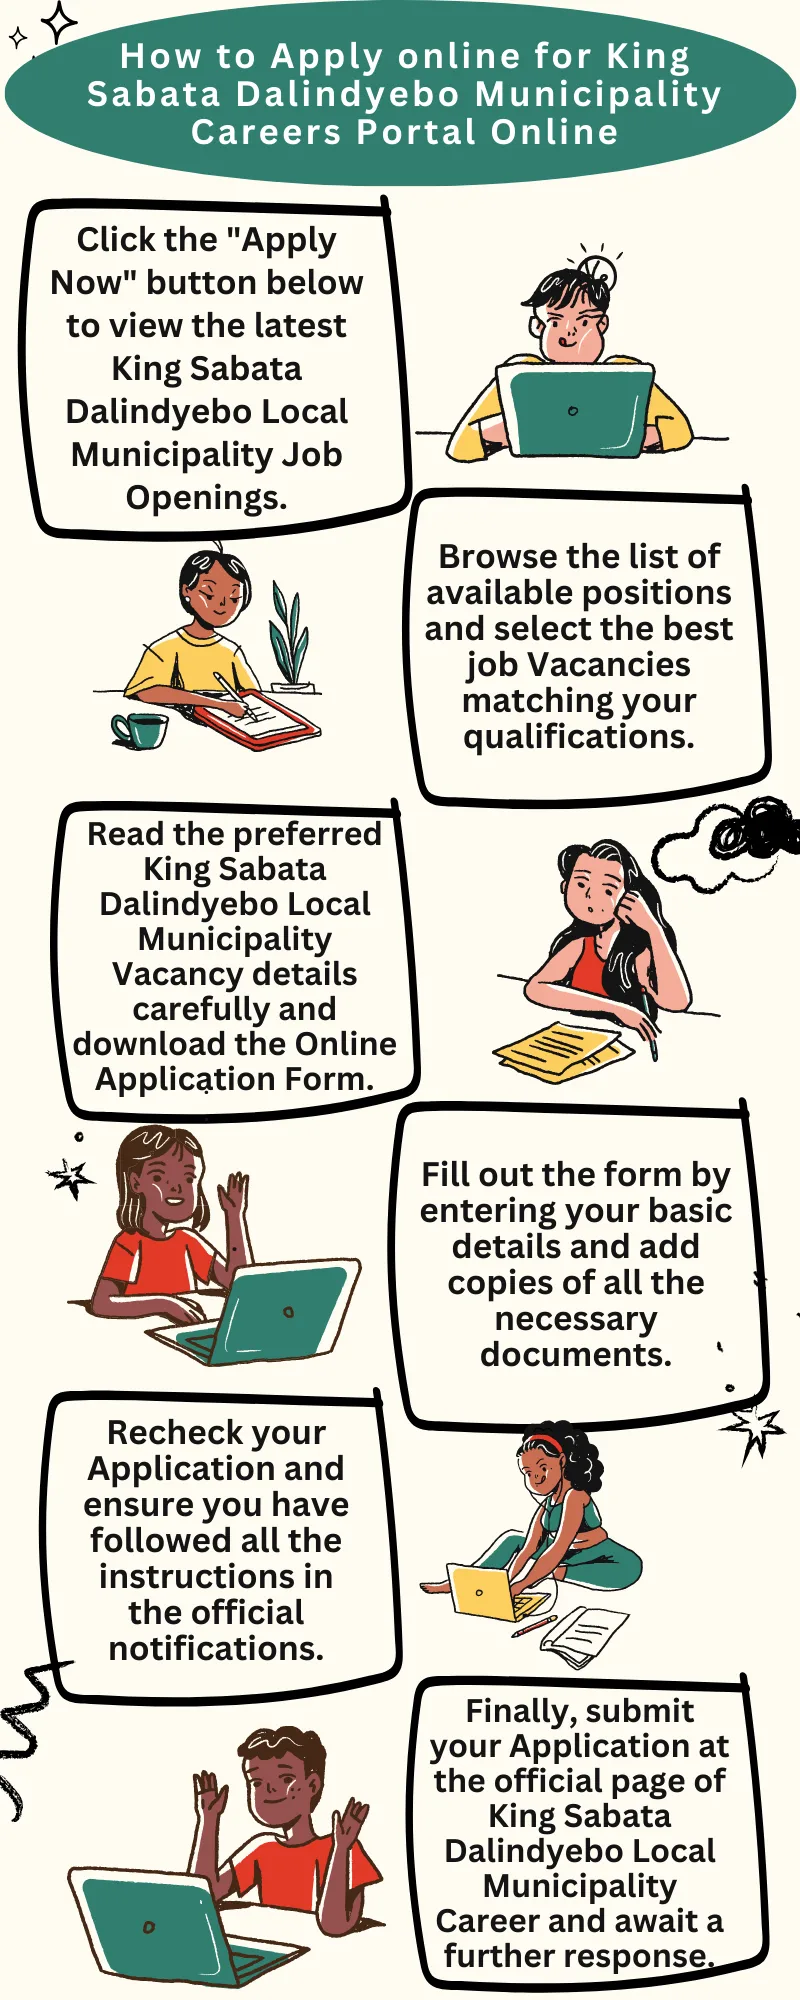 How to Apply online for King Sabata Dalindyebo Municipality Careers Portal Online